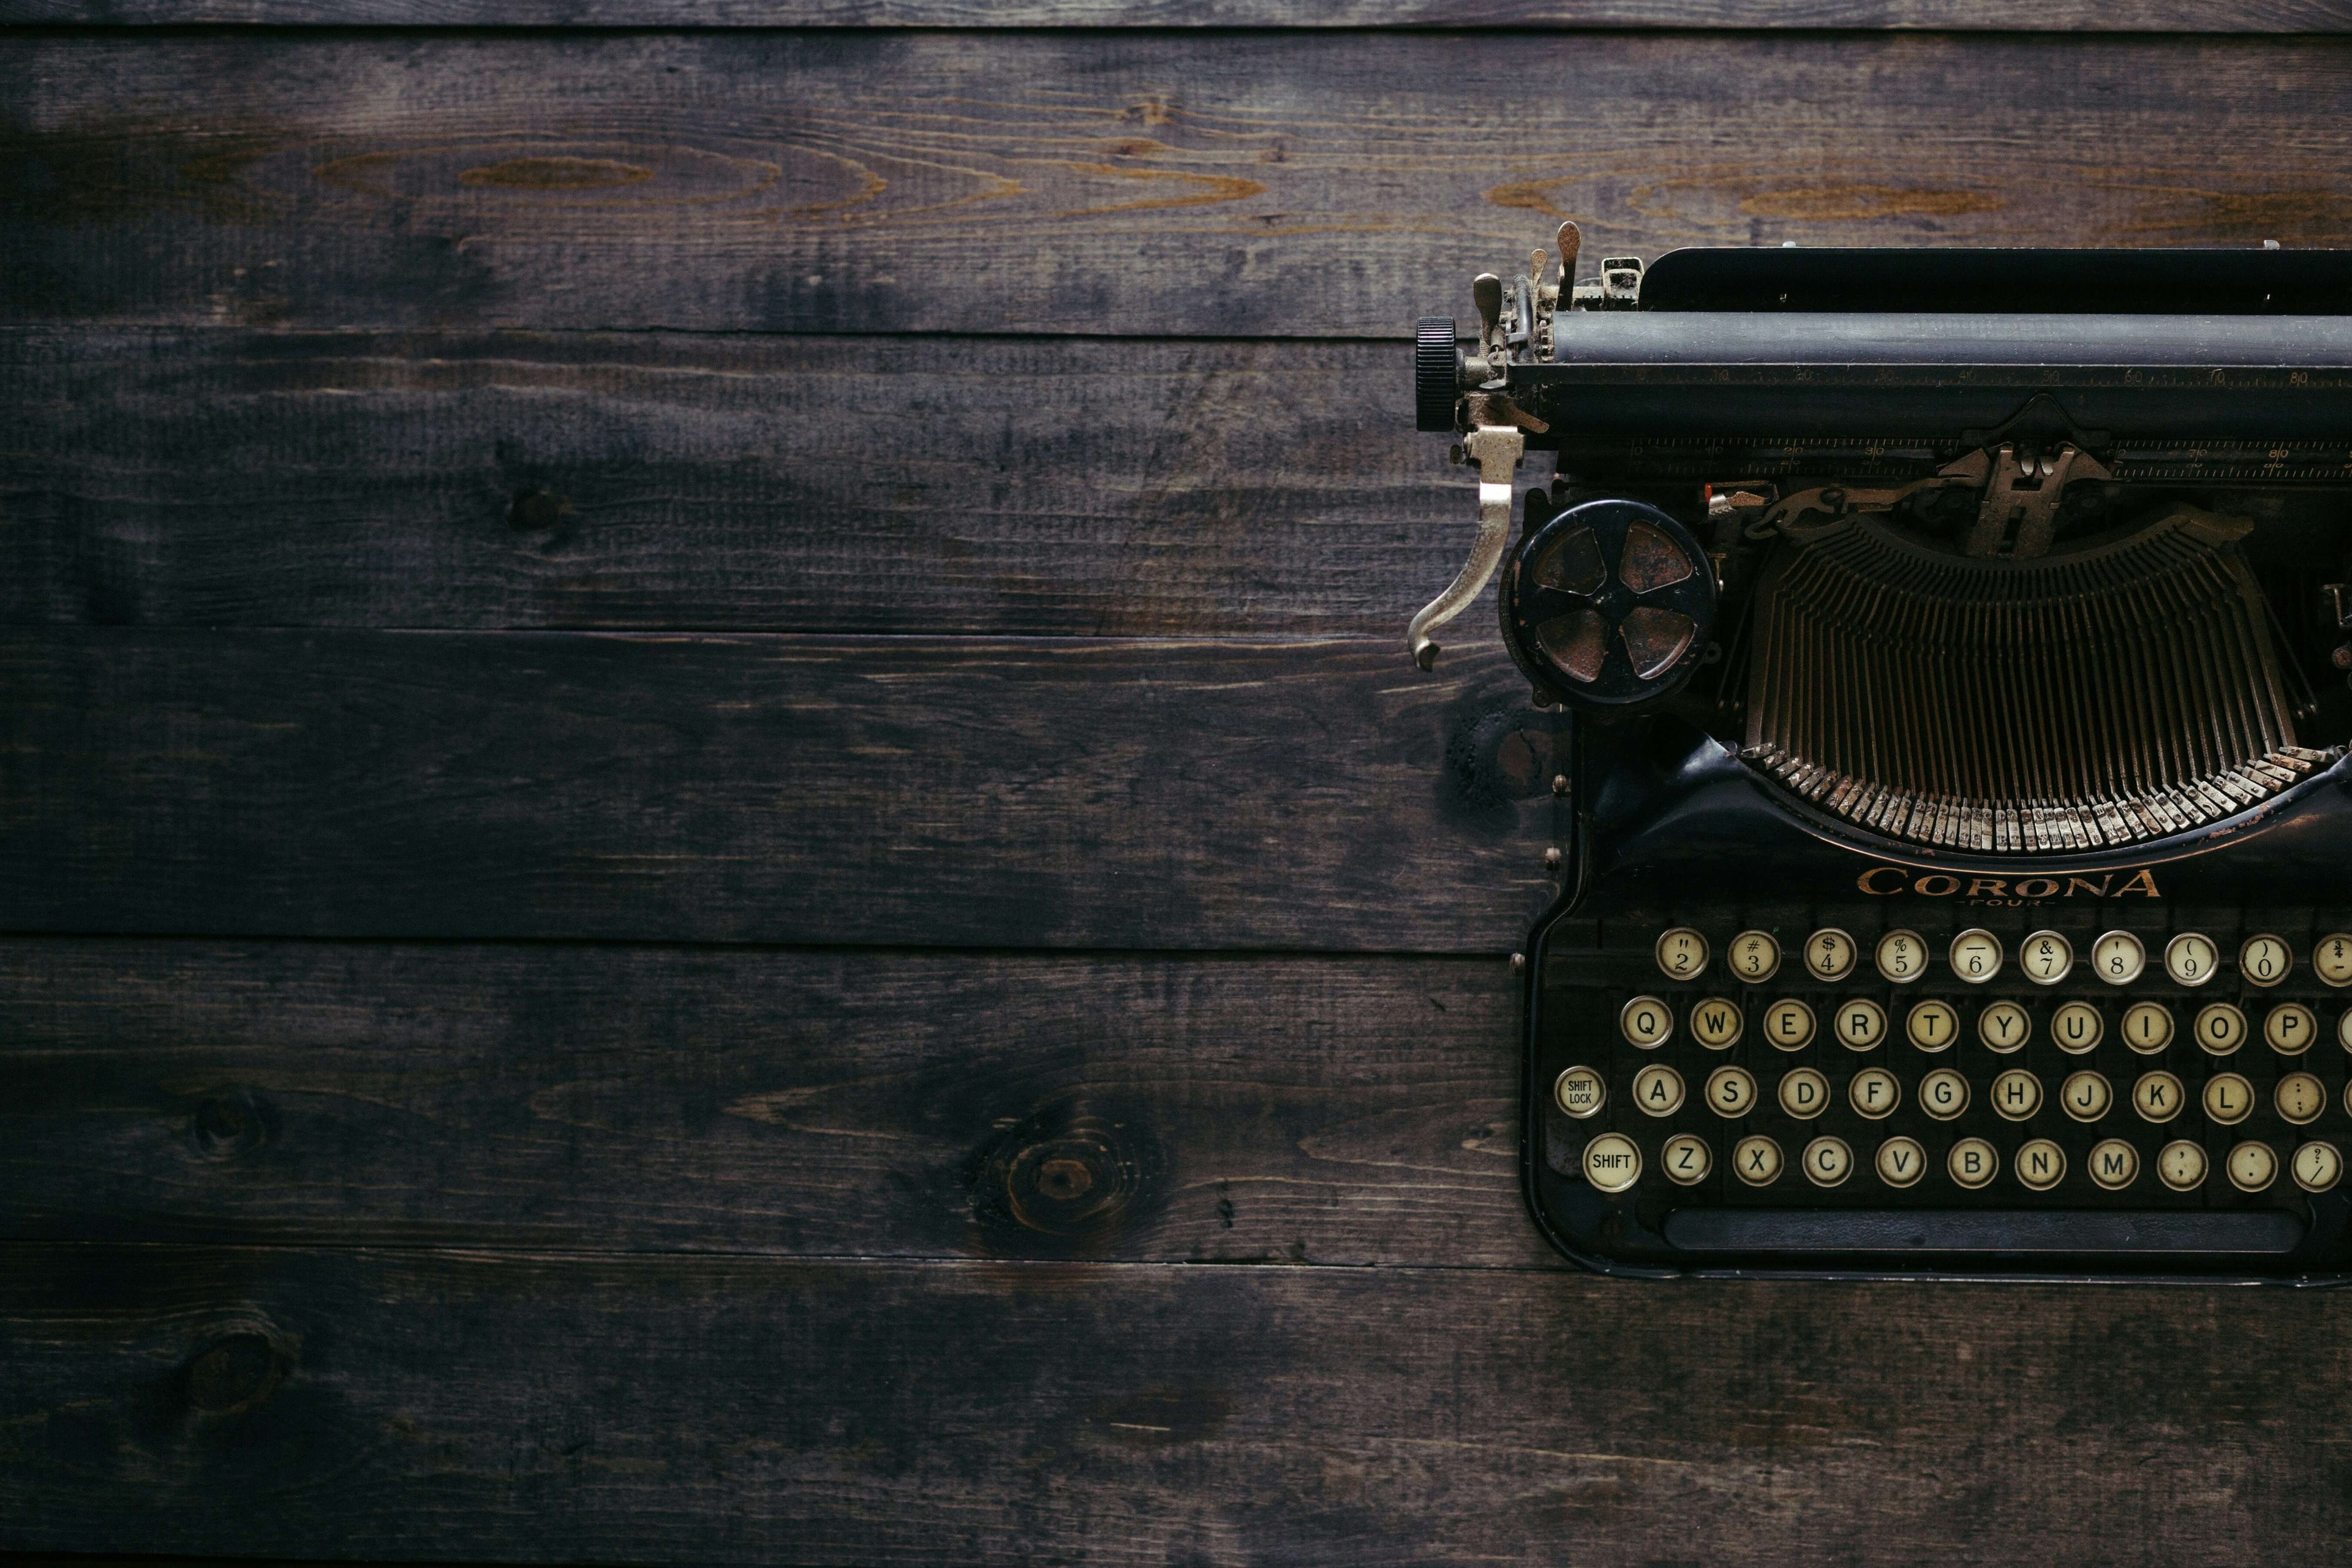 Stock image by Patrick Fore. Vintage typewriter on a dark wooden surface.